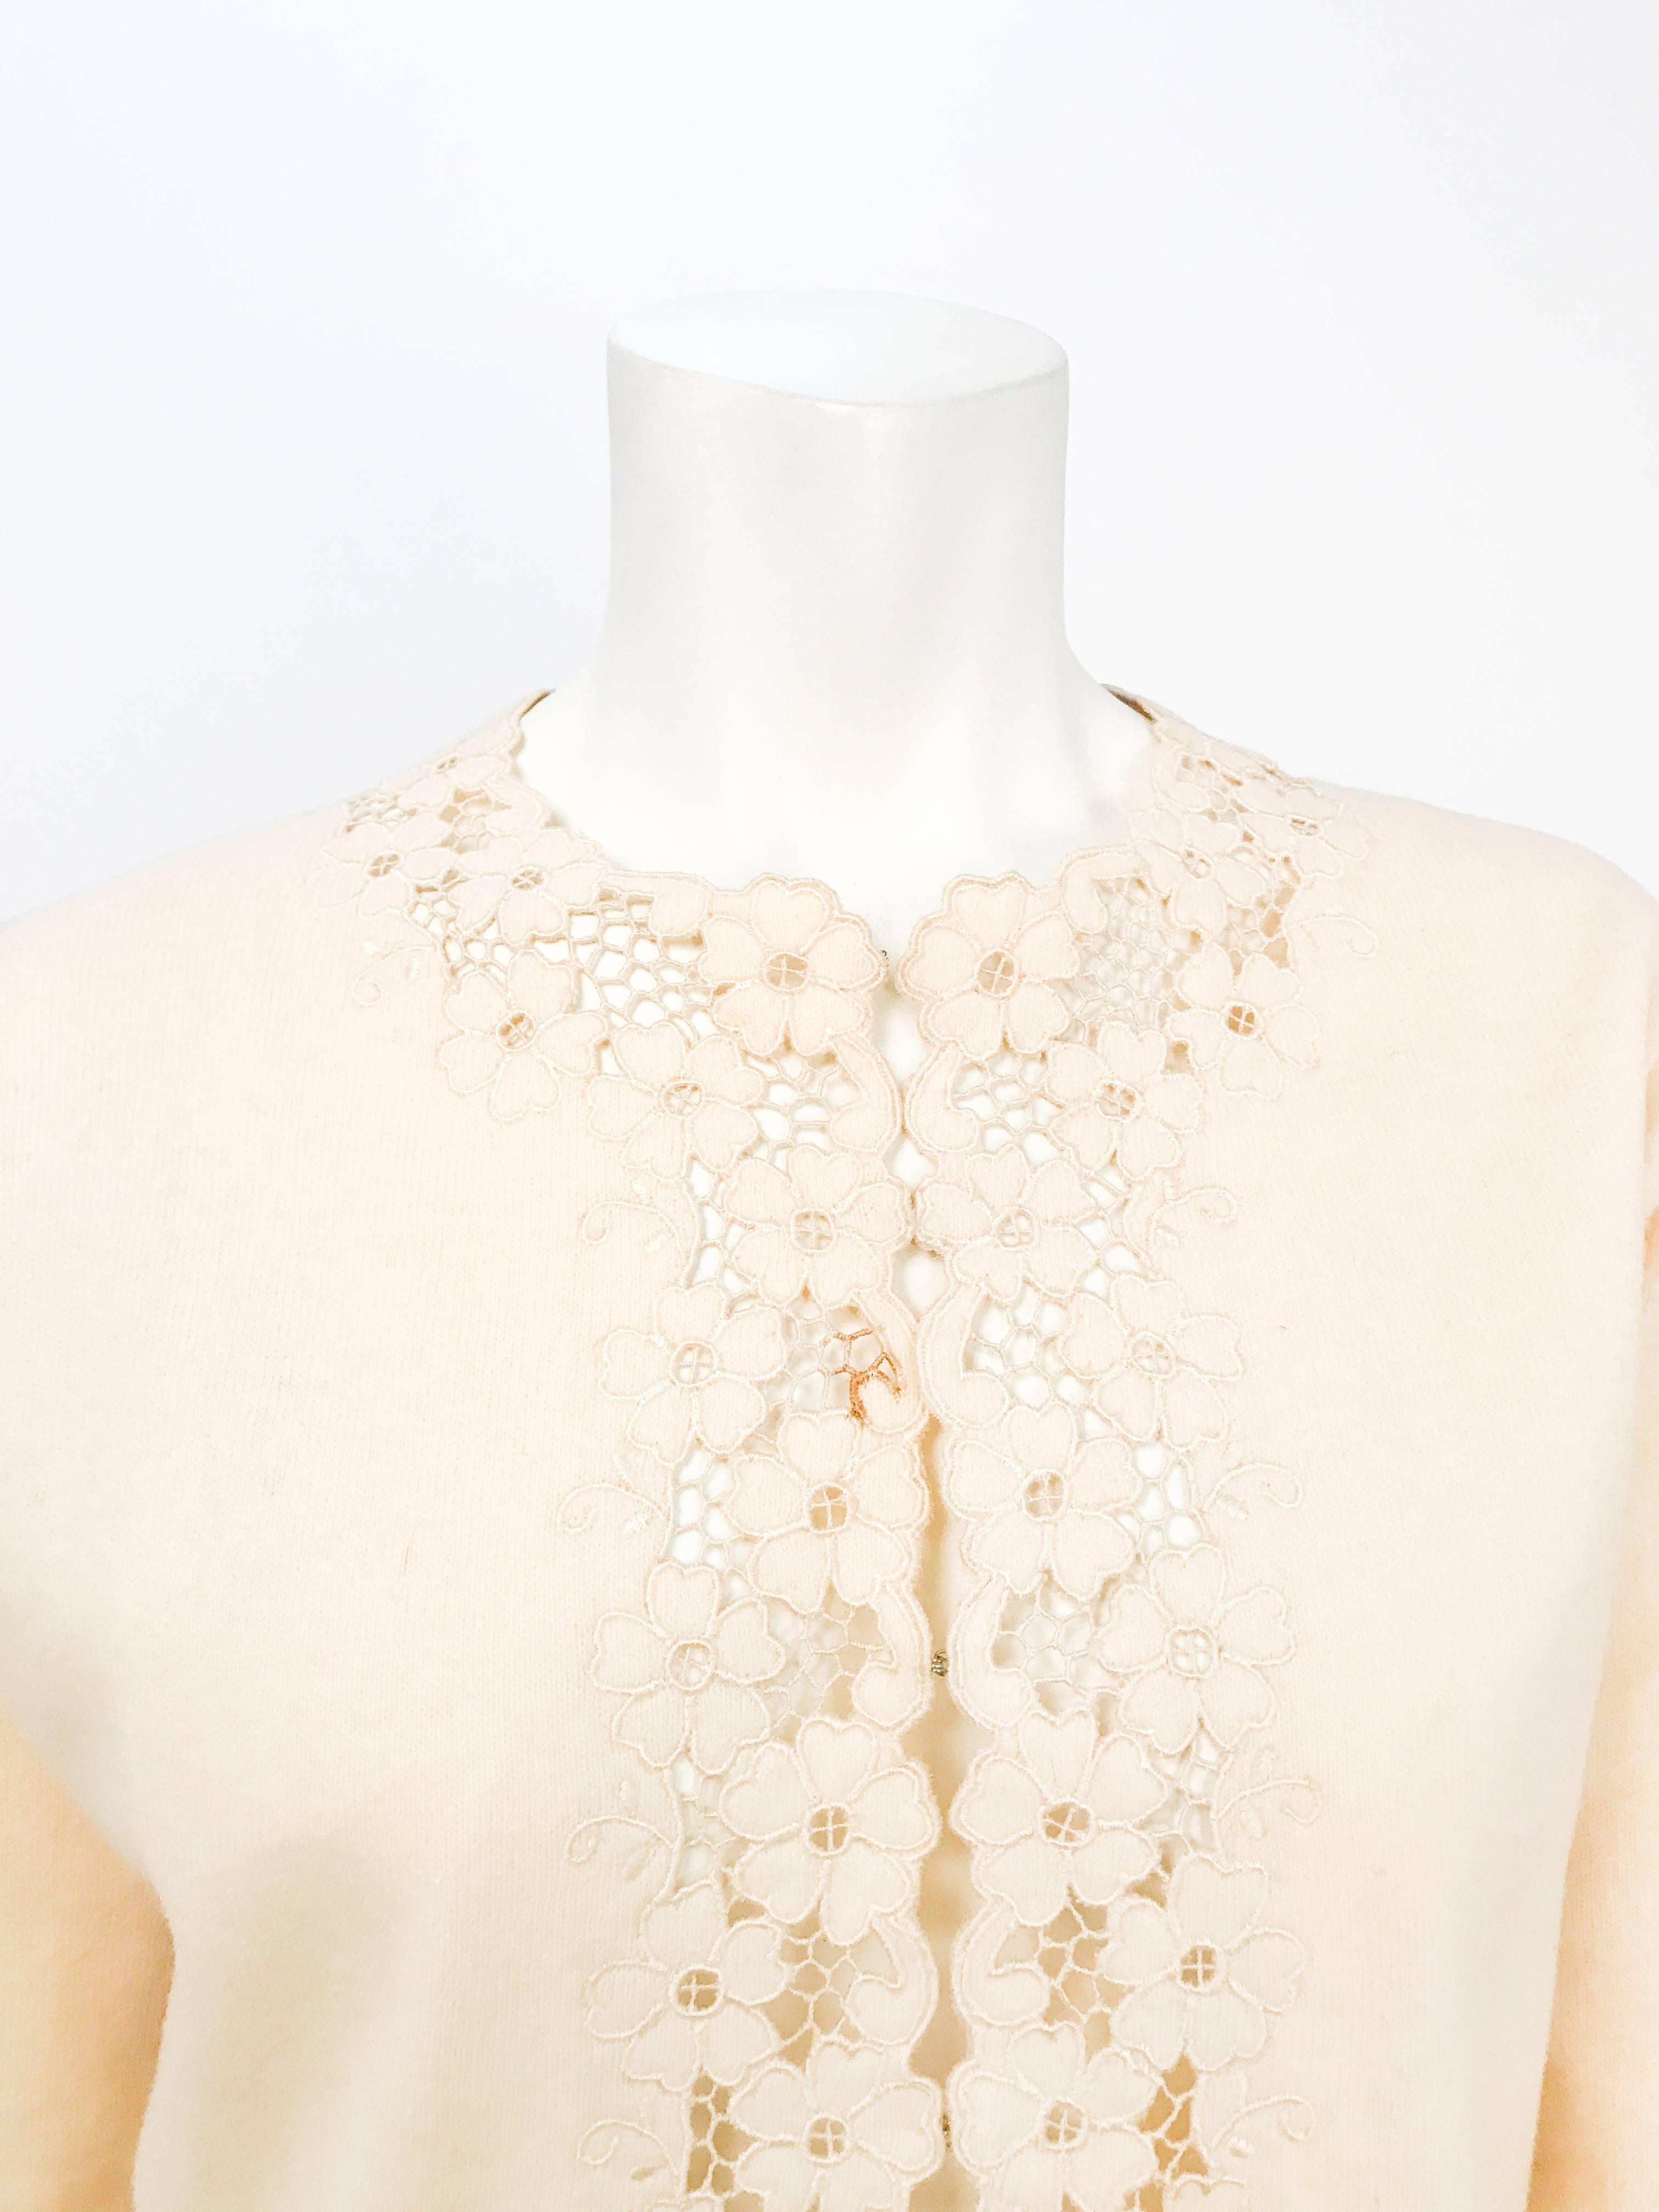 1950s Cream Wool Cardigan with Embroidery and Cut-work. Cream colored wool cardigan with embroidery and cut-work details along the neckline, opening and cuffs. Hook/eye closure along the front.